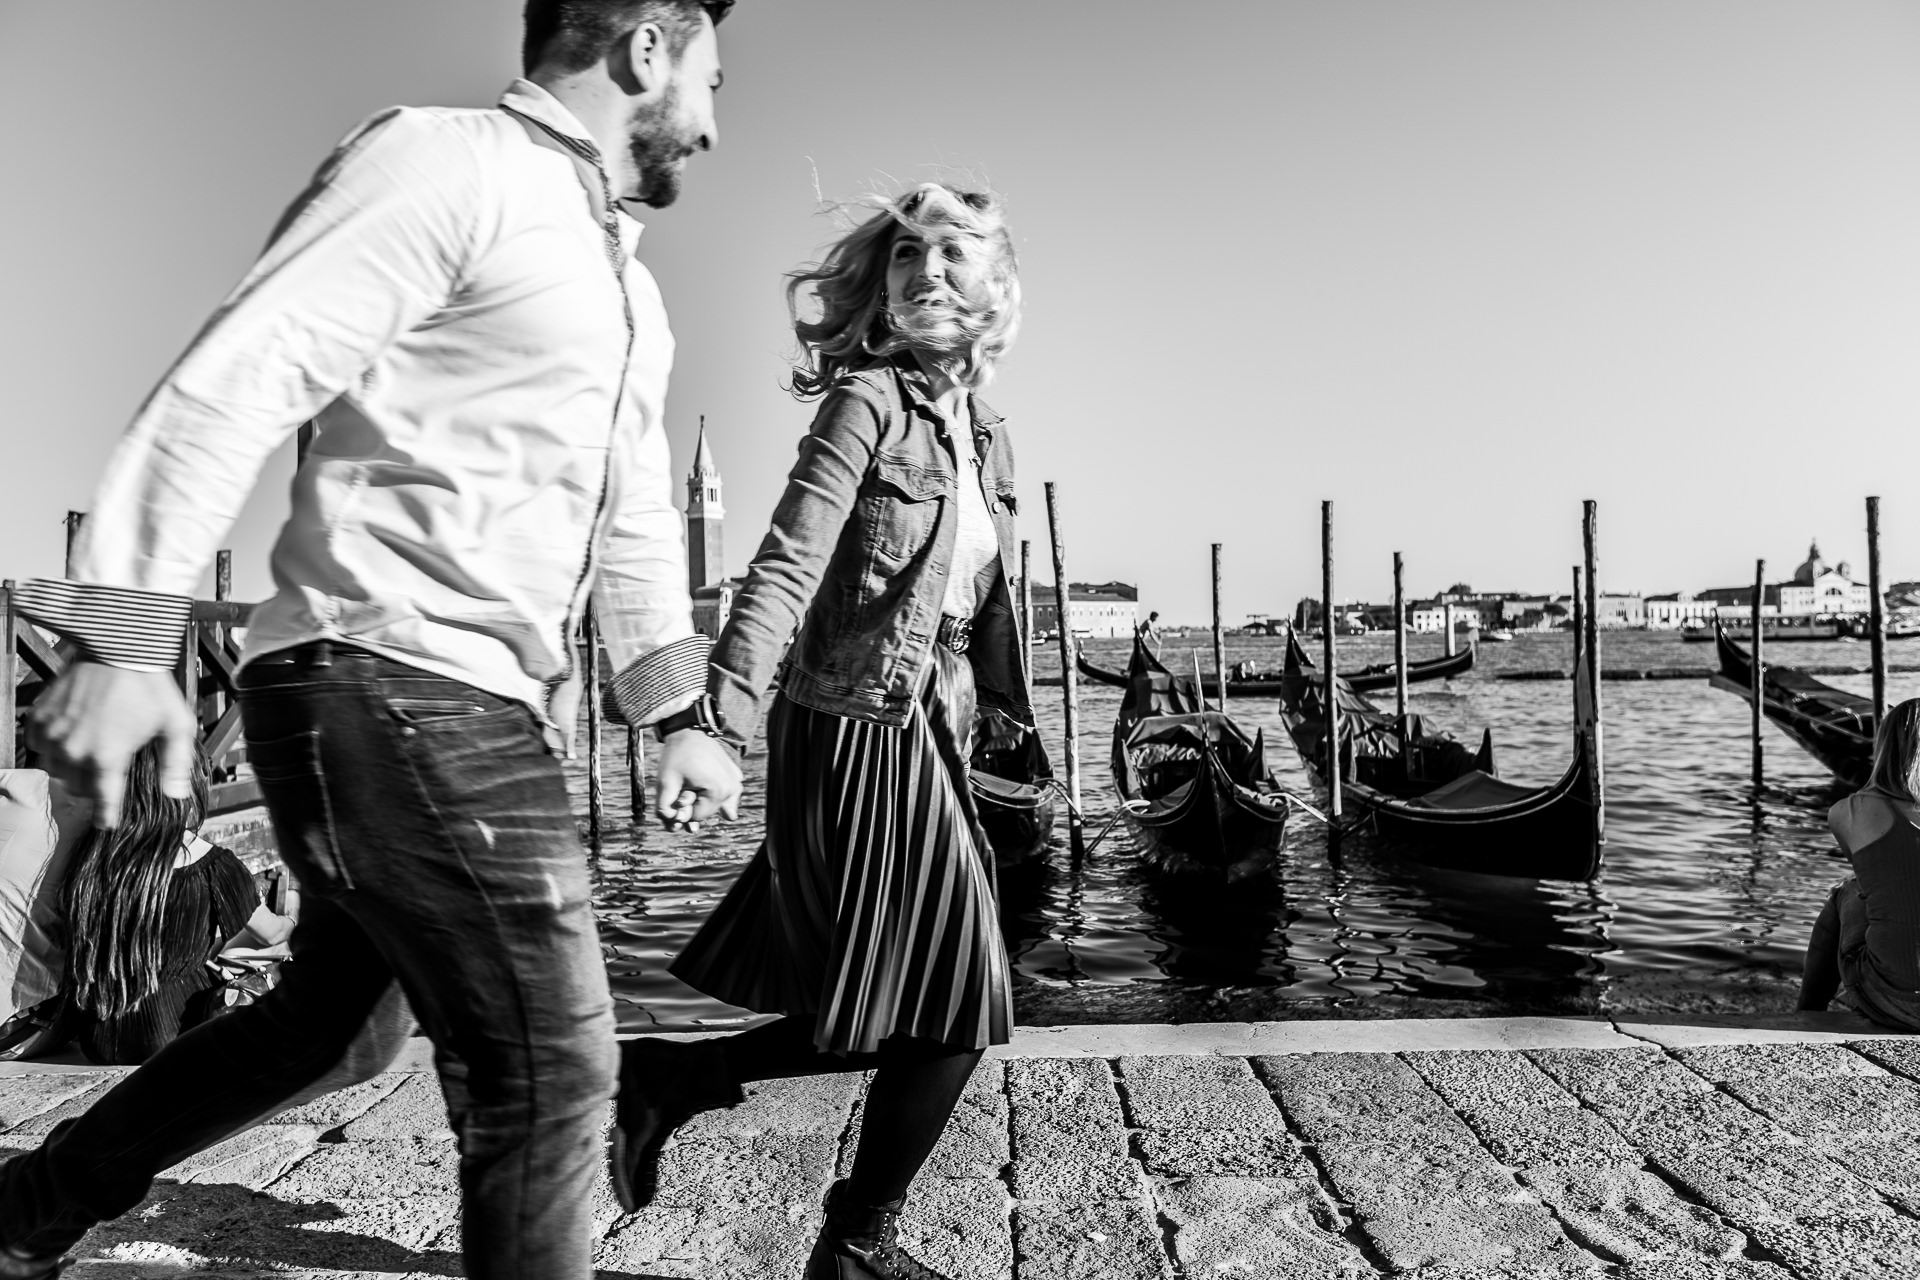 Couple photo session in Venice, Italy with Raluca + Costin by Destination Wedding Photographer Mihai Zaharia05